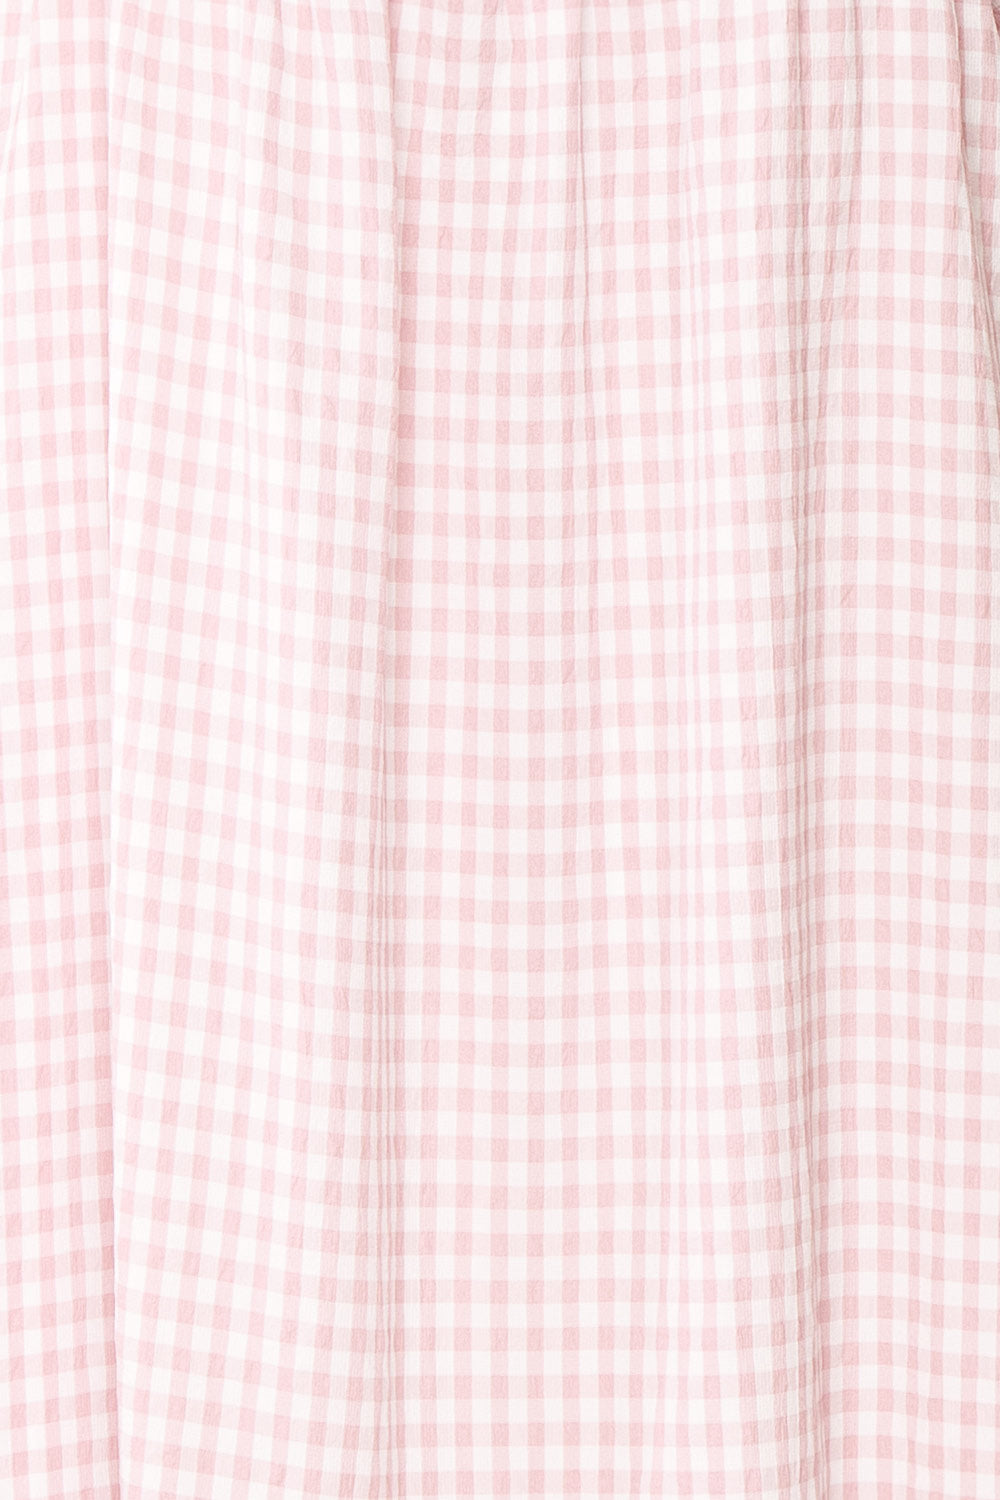 Lieke Square Neck Pink Gingham Midi Dress with Ruffles | Boutique 1861 fabric 